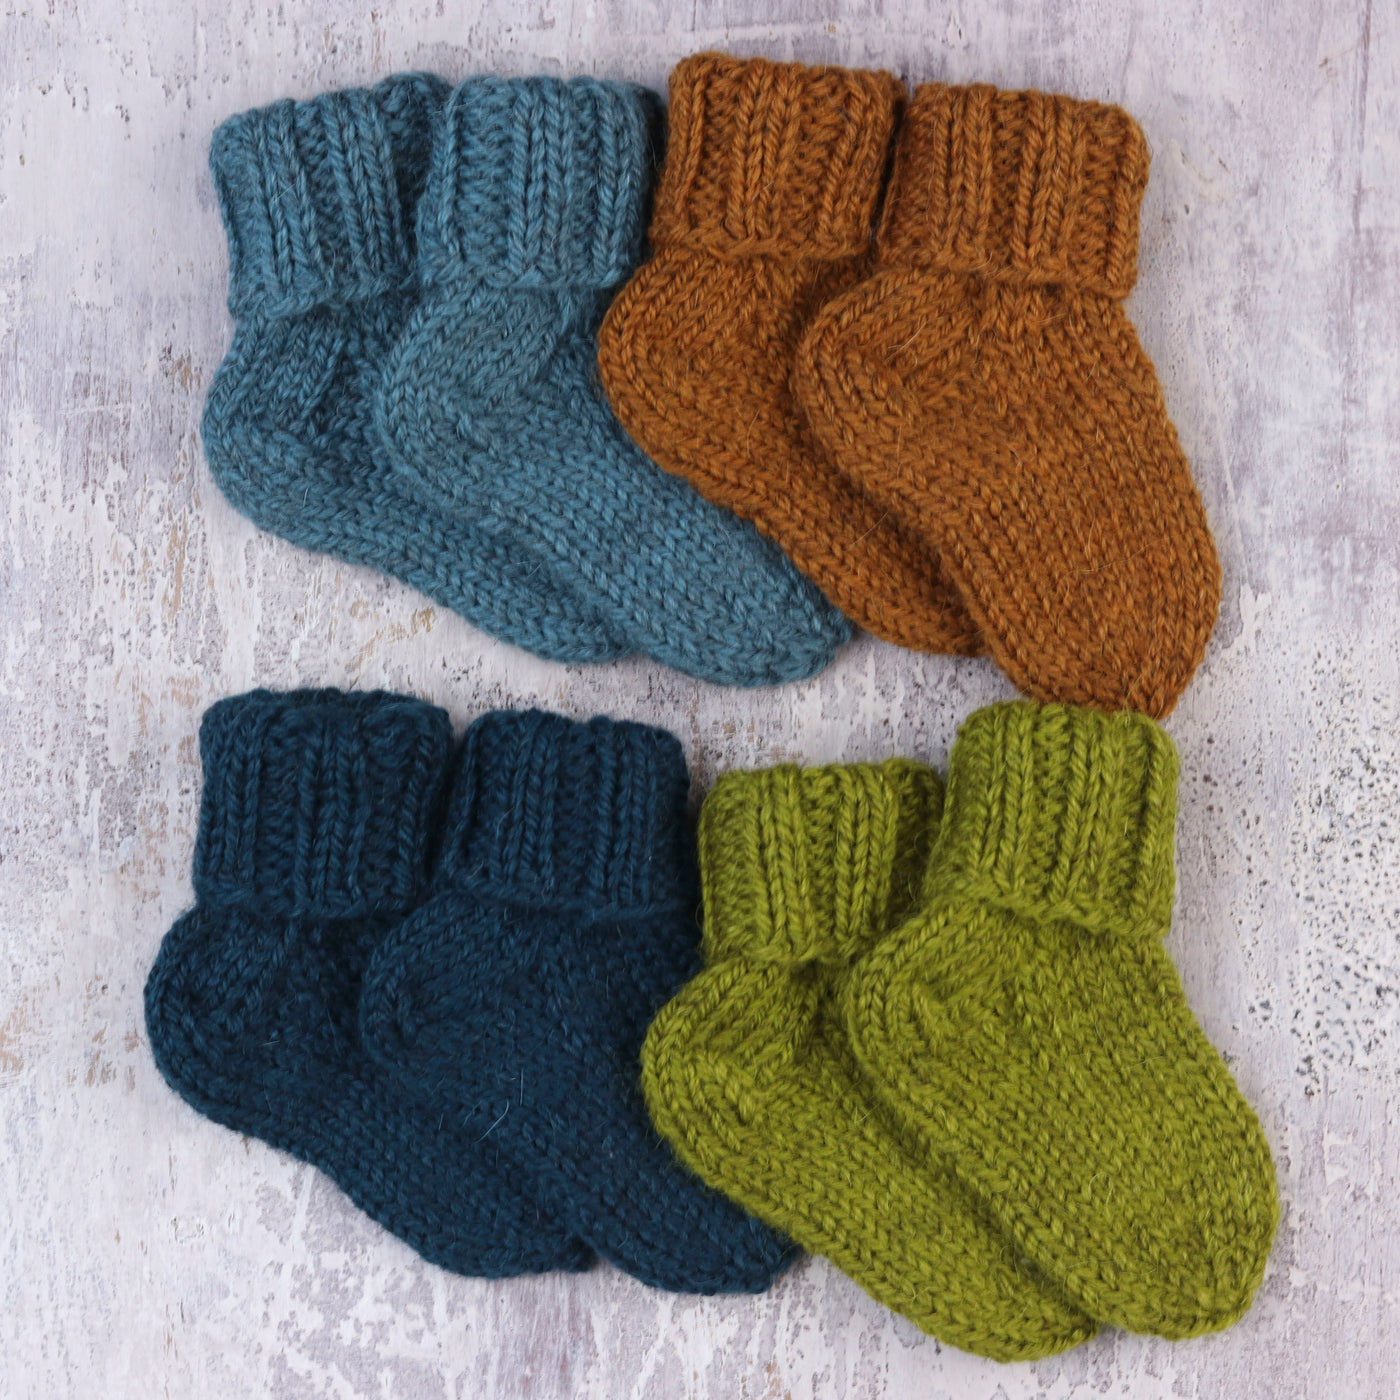 The Fibre Co. Cumbria One Sock Baby Pattern